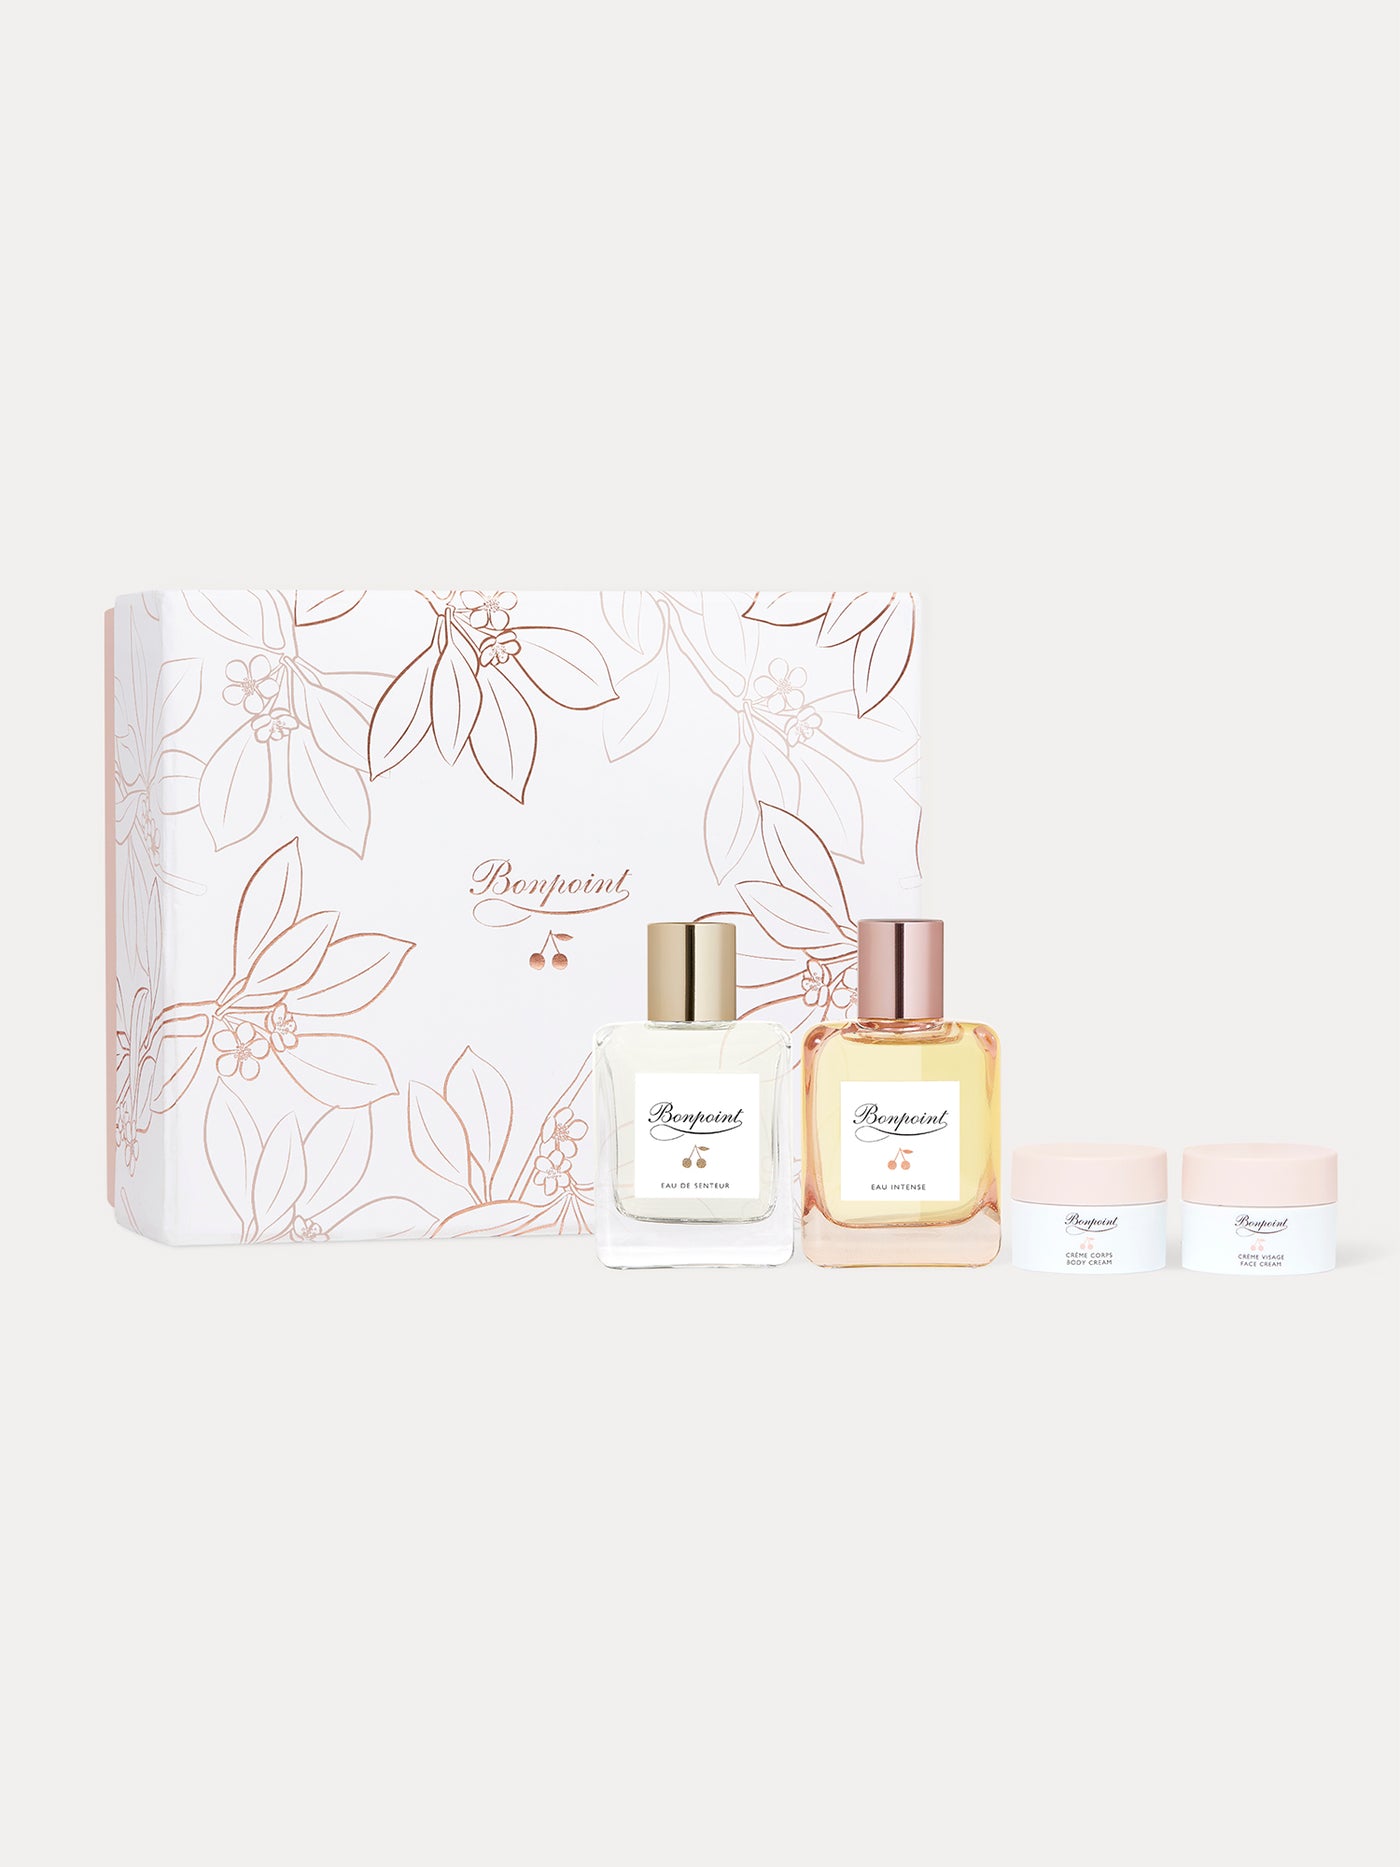 Cherry blossom scented gift - Mom and kids duo set